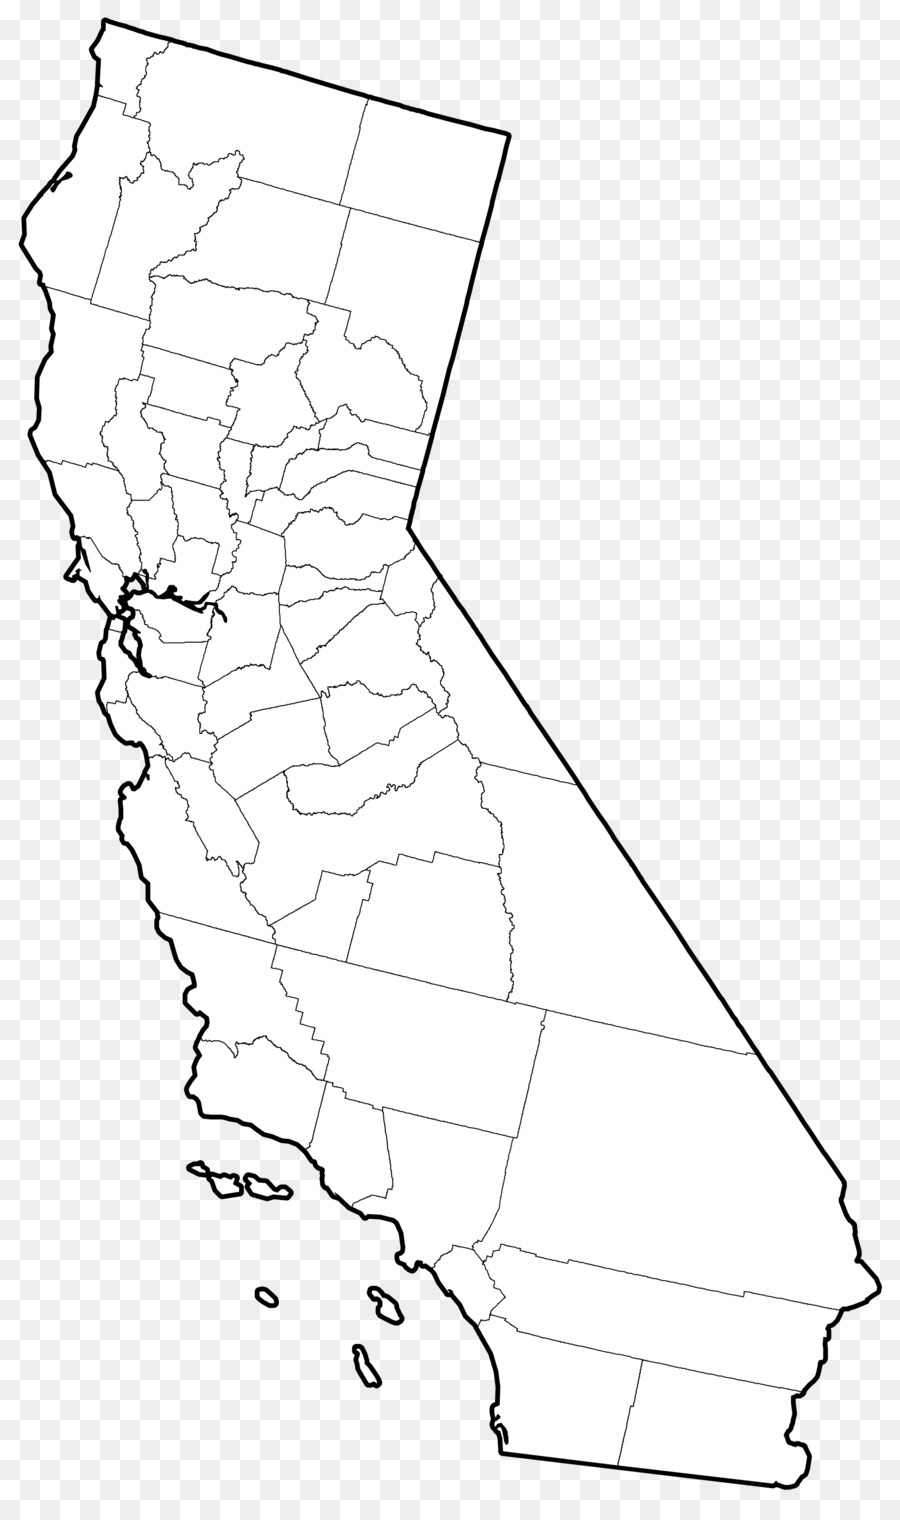 Northern California Kern County, California Floods in California Christmas flood of 1964 - California Outline png download - 2000*3348 - Free Transparent Northern California png Download.